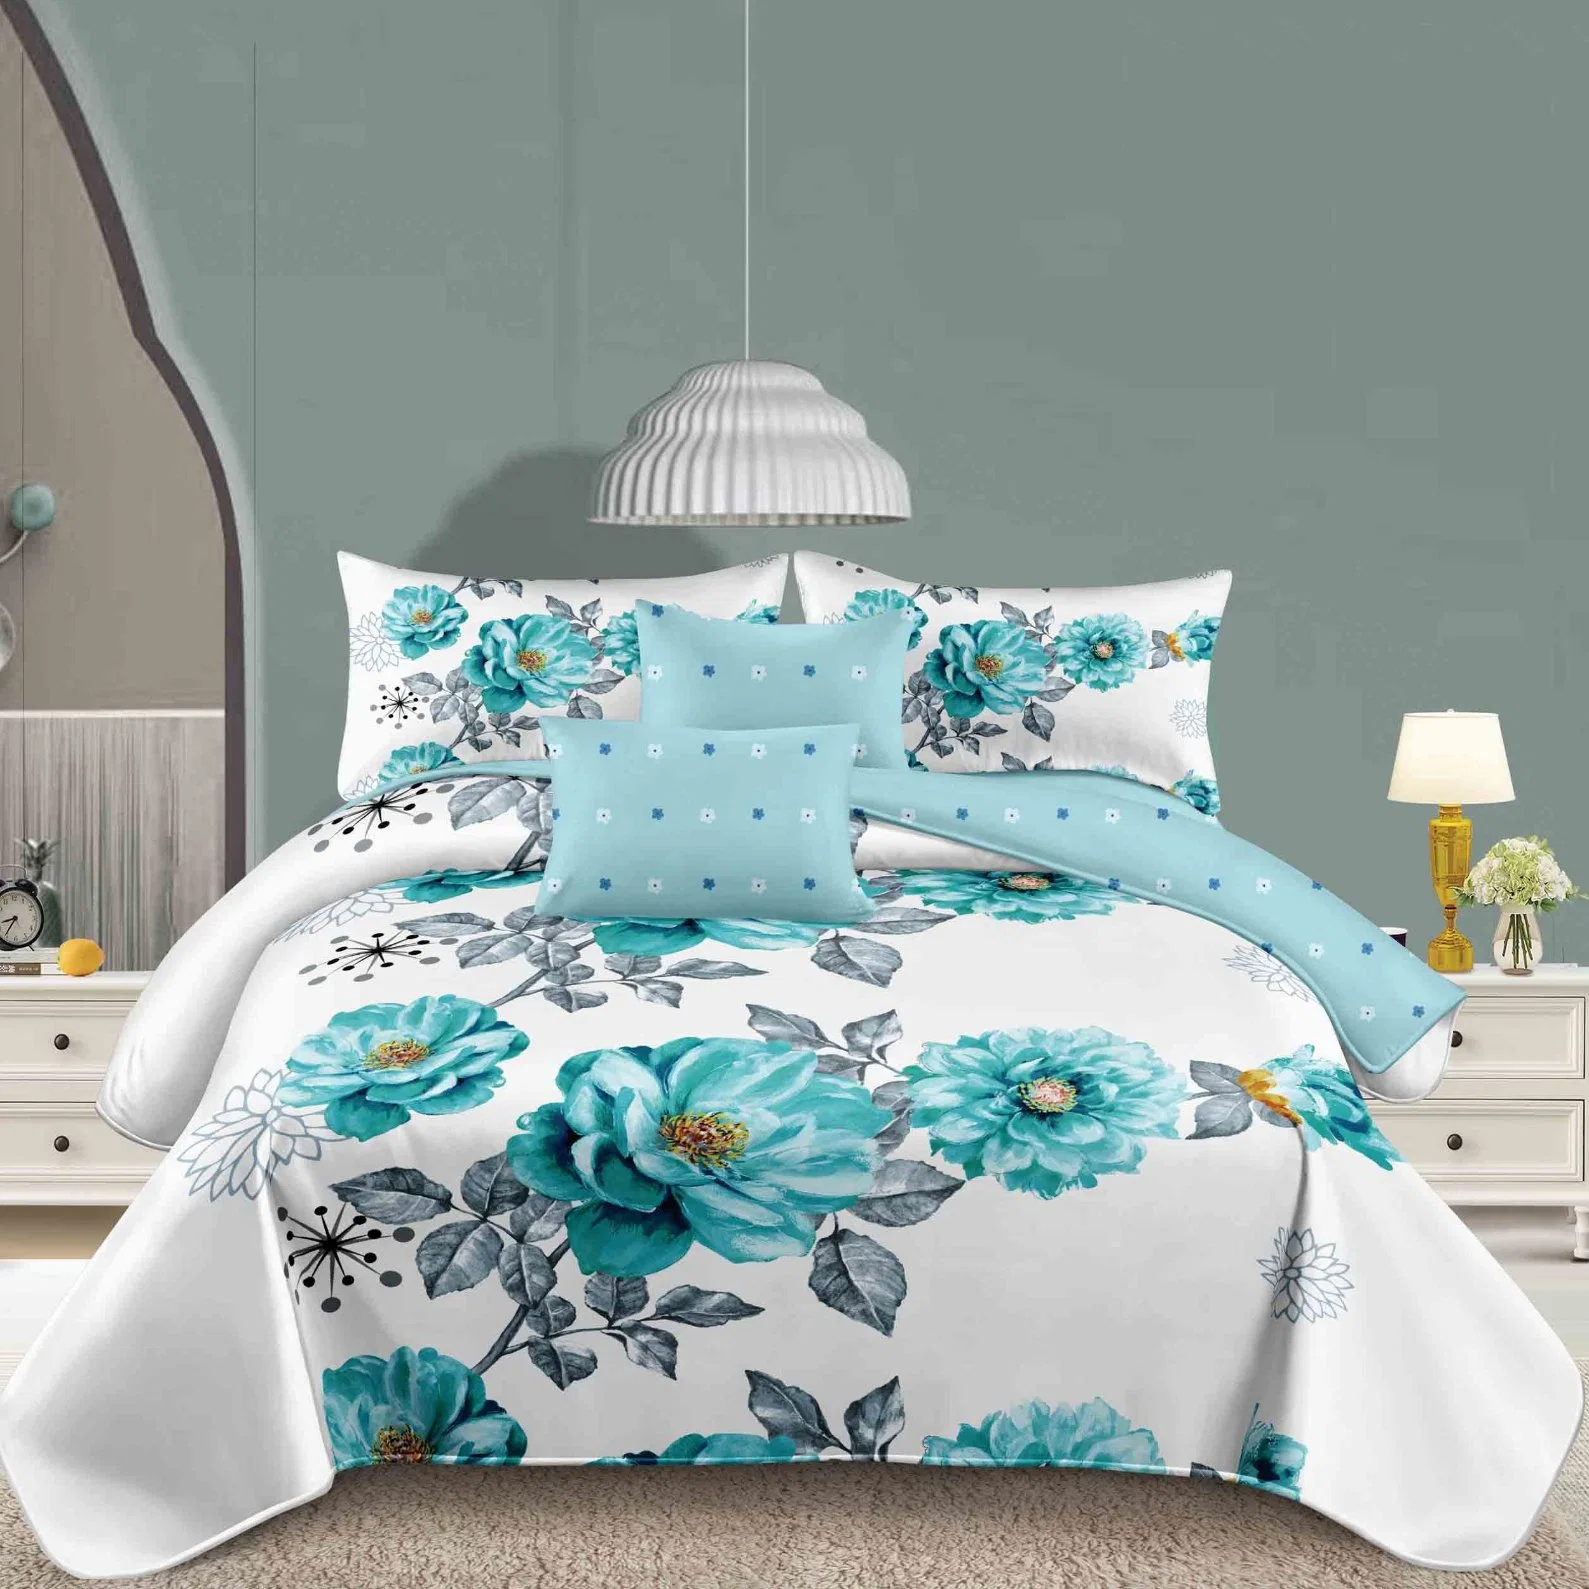 MID Esat Style Printed Bed Comforter with Filling Bedroom Set